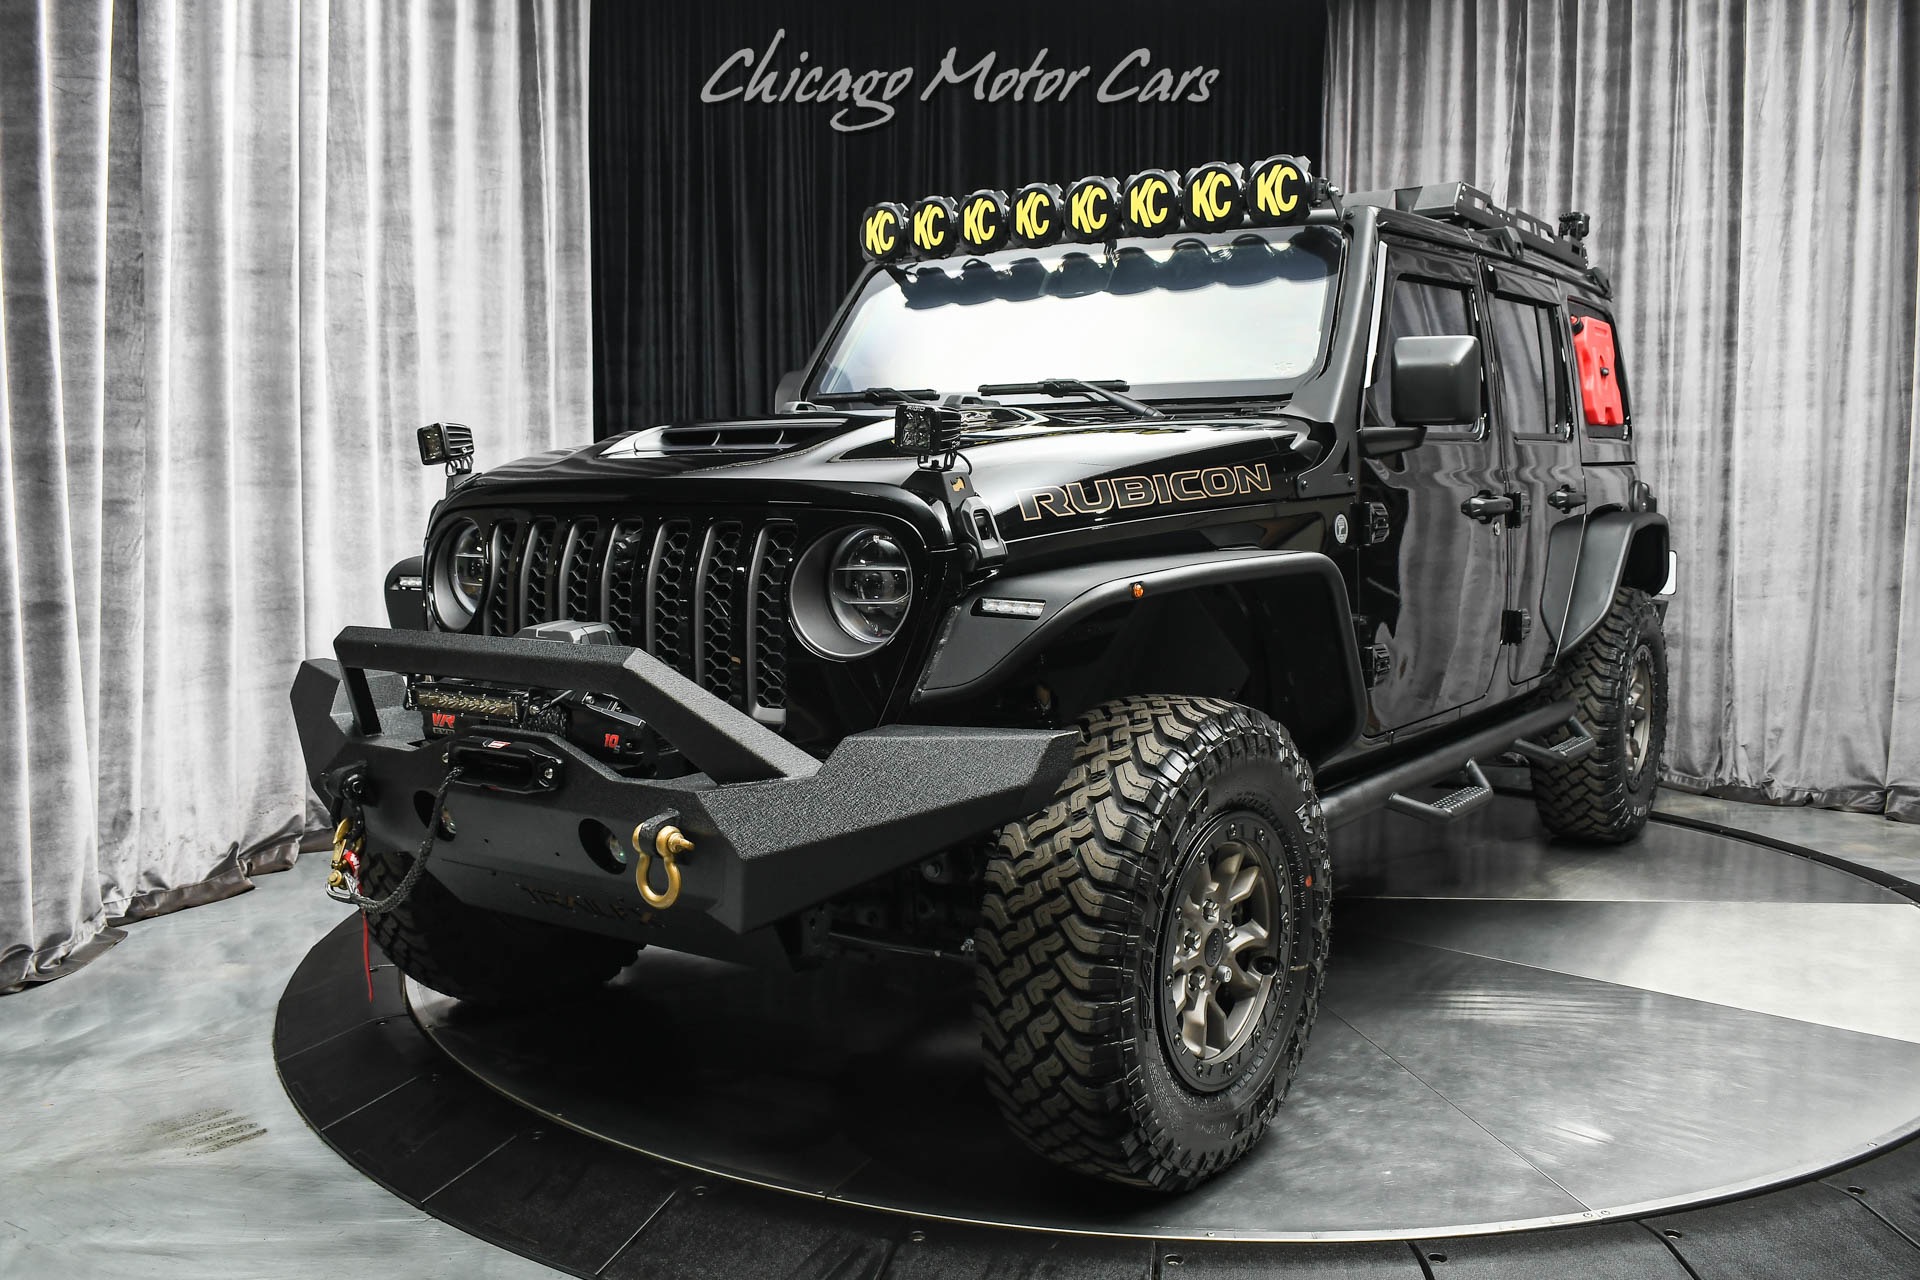 Used 2021 Jeep Wrangler Unlimited Rubicon 392 4x4 BULLET RESISTANT! Loaded  with Upgrades! Armored! For Sale ($189,800) | Chicago Motor Cars Stock  #MW732929-MK